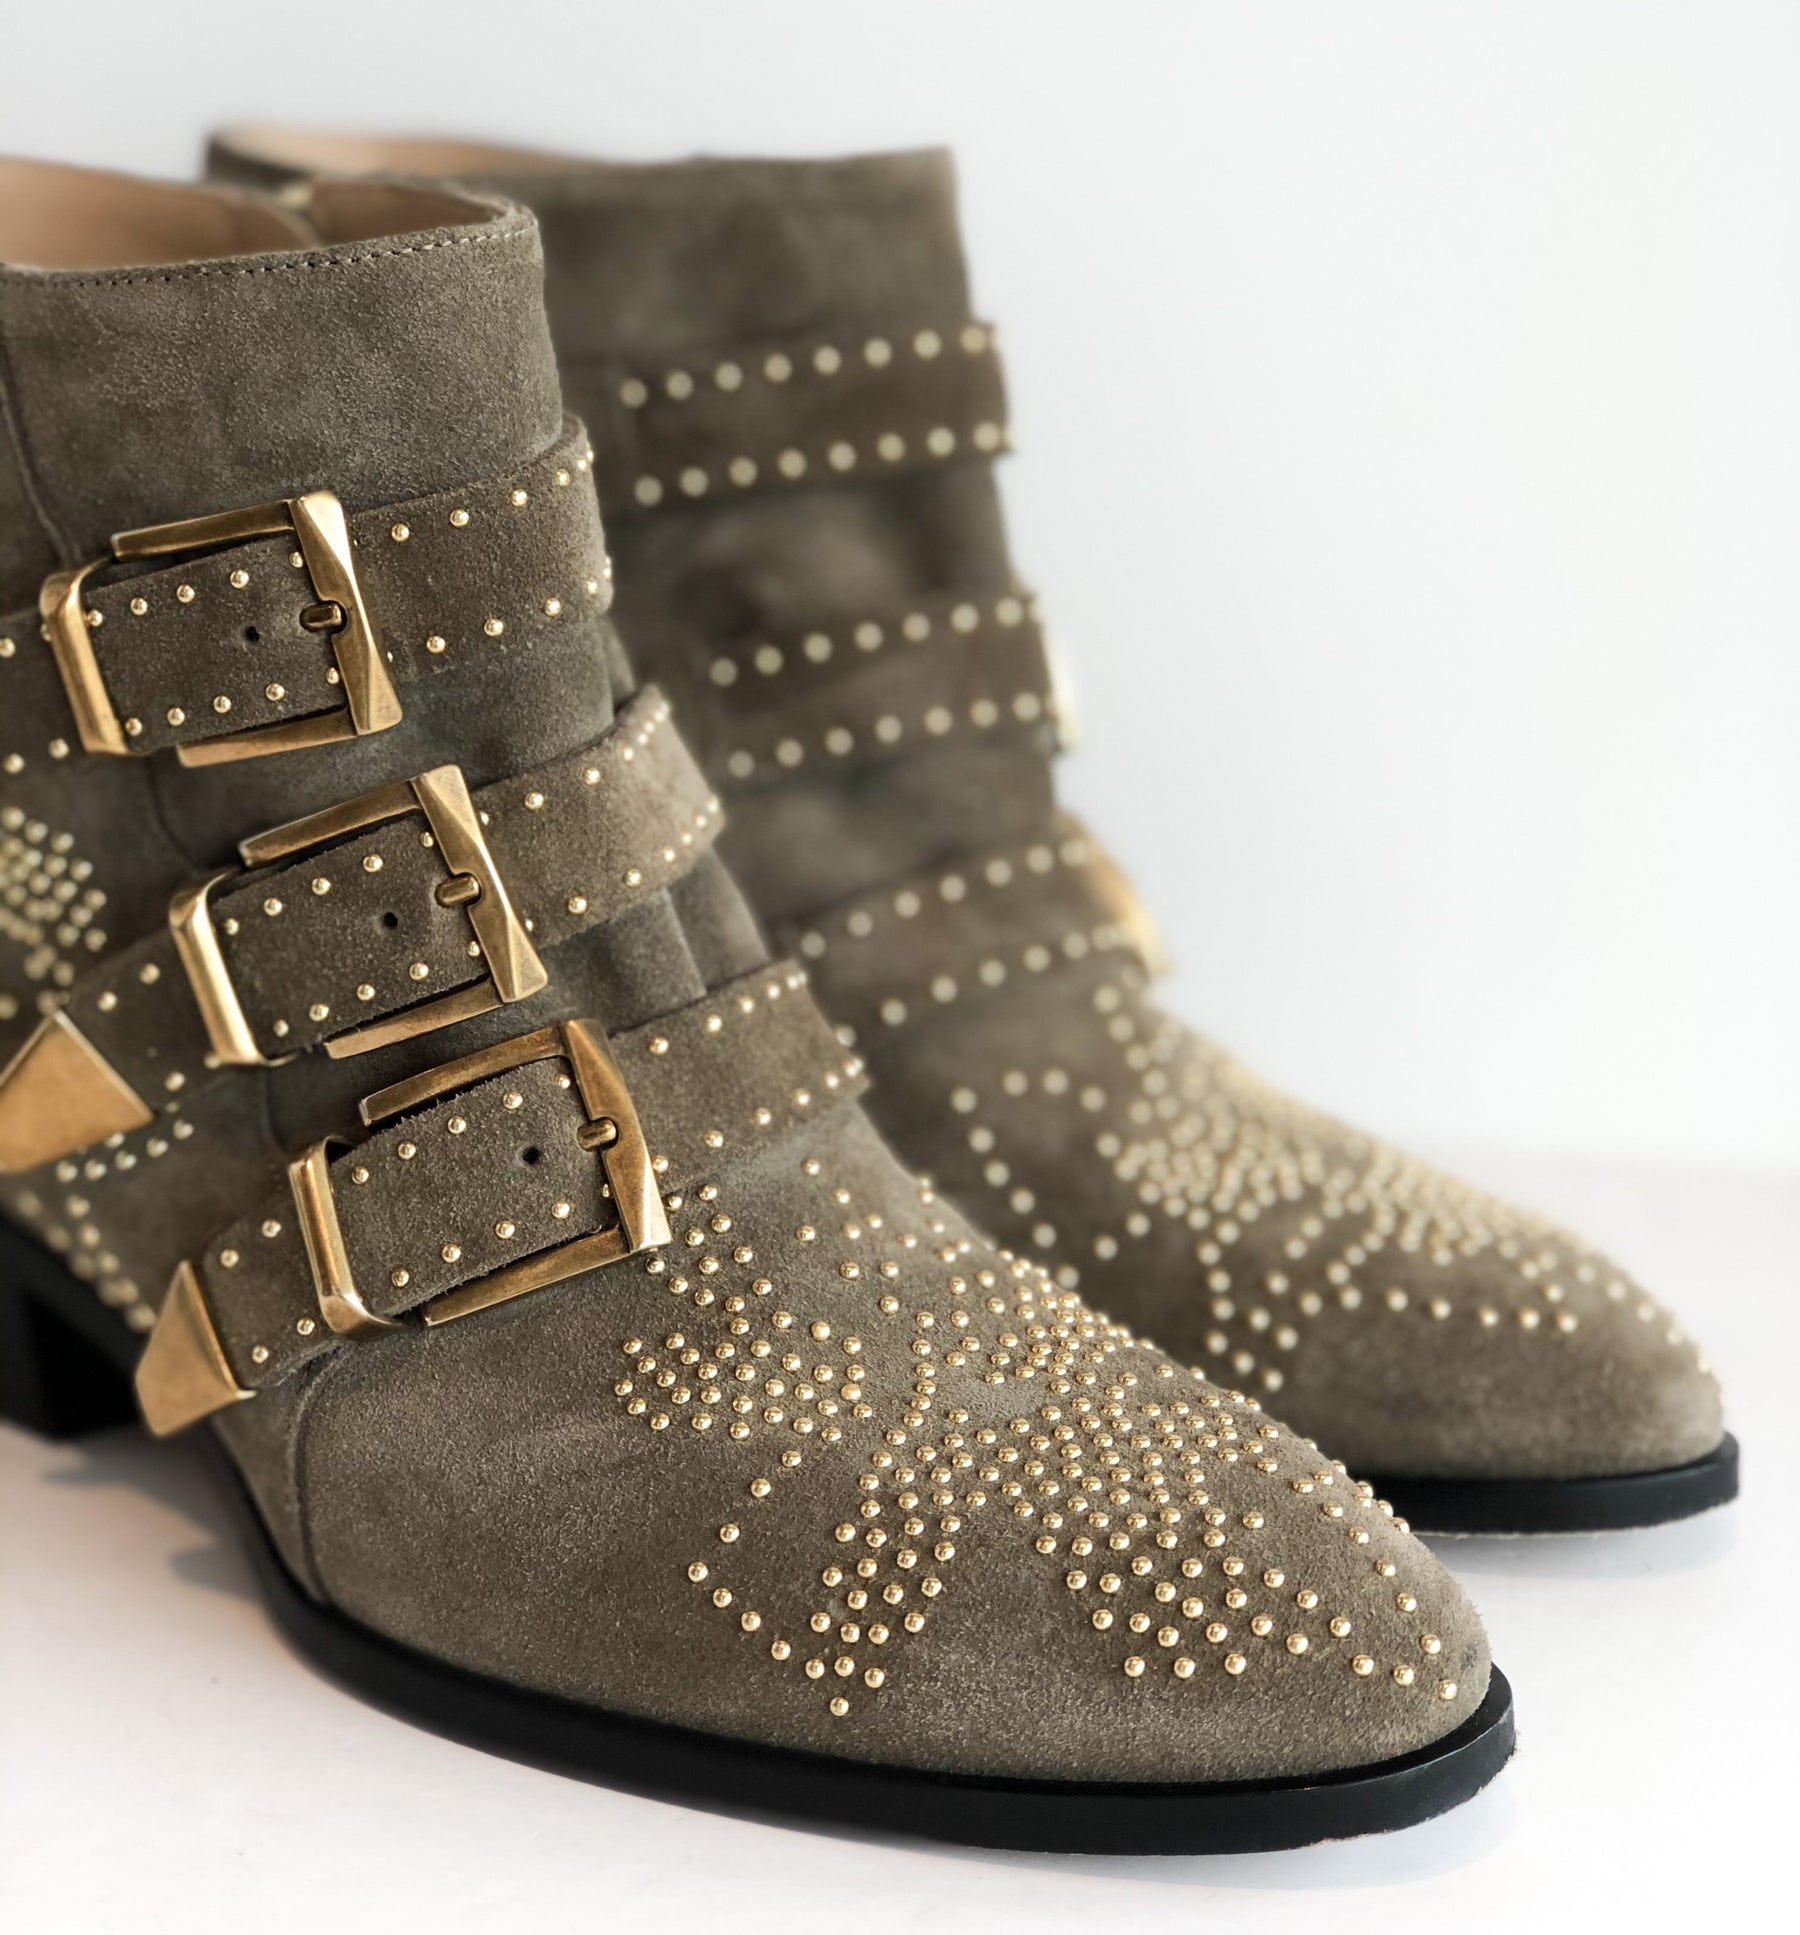 Chloe Taupe Stud Booties Gold Details